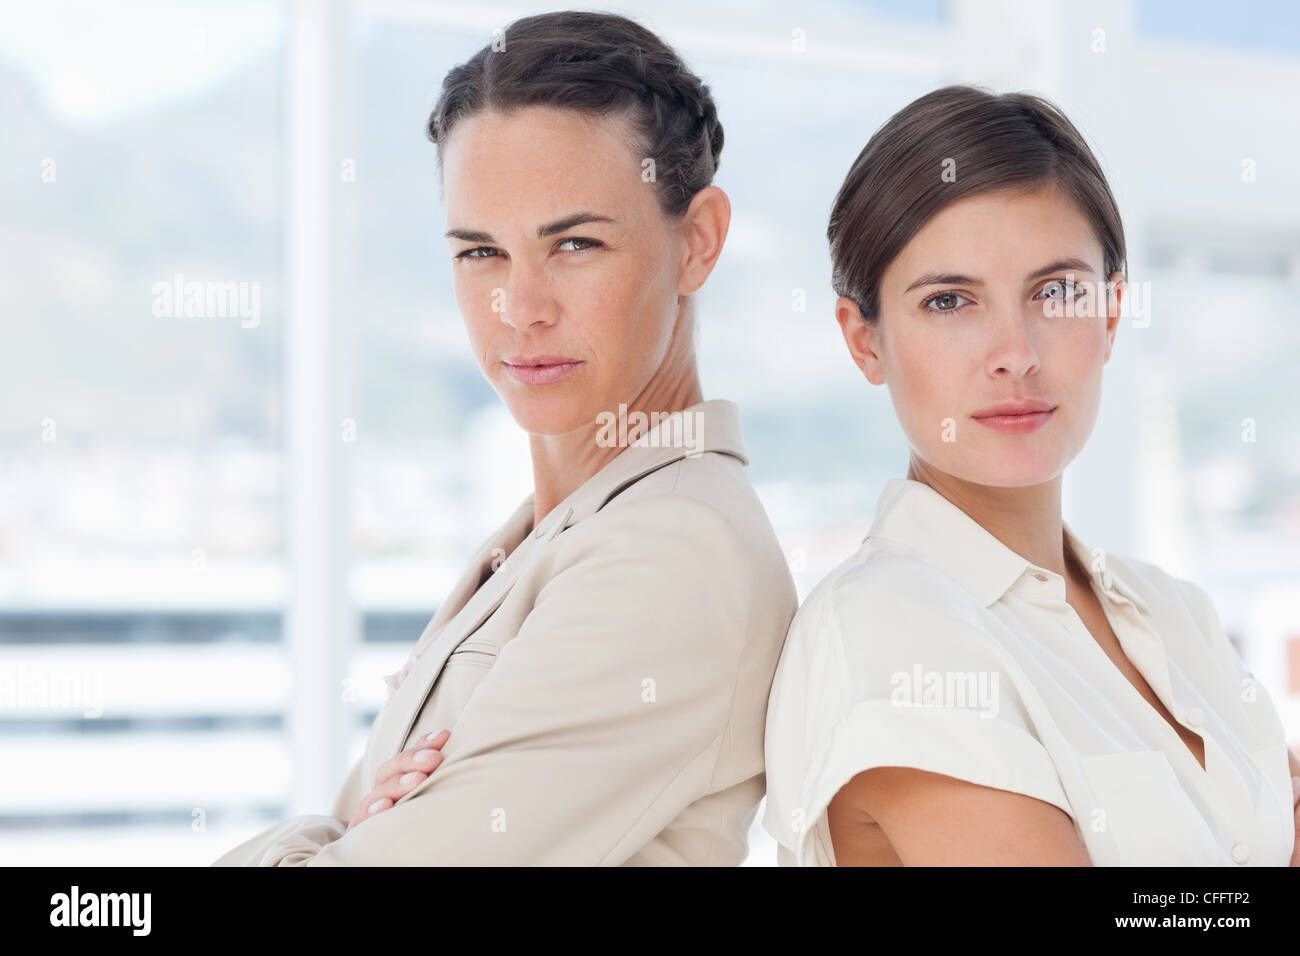 Serious businesswomen with arms folded standing back to back Stock Photo